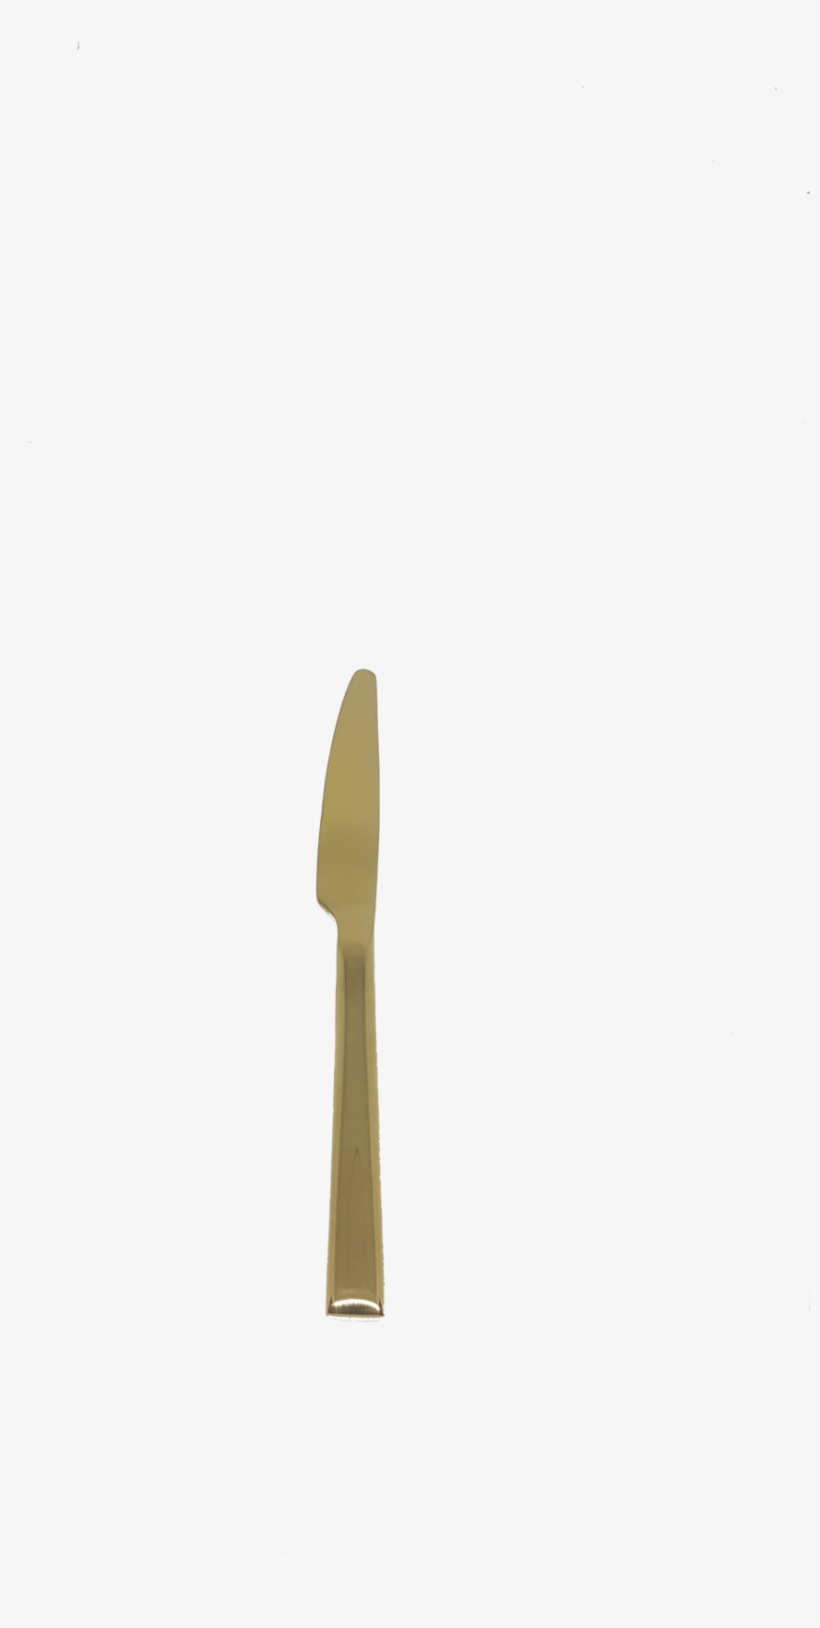 Gold Cutlery Knife Available For Hire - Knife, transparent png #8319526